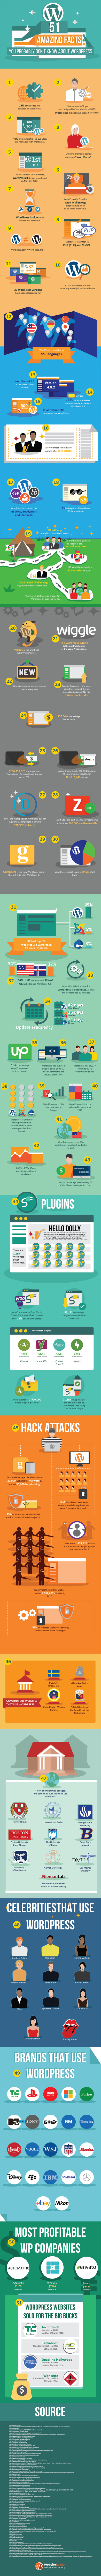 facts about Wordpress infographic-min